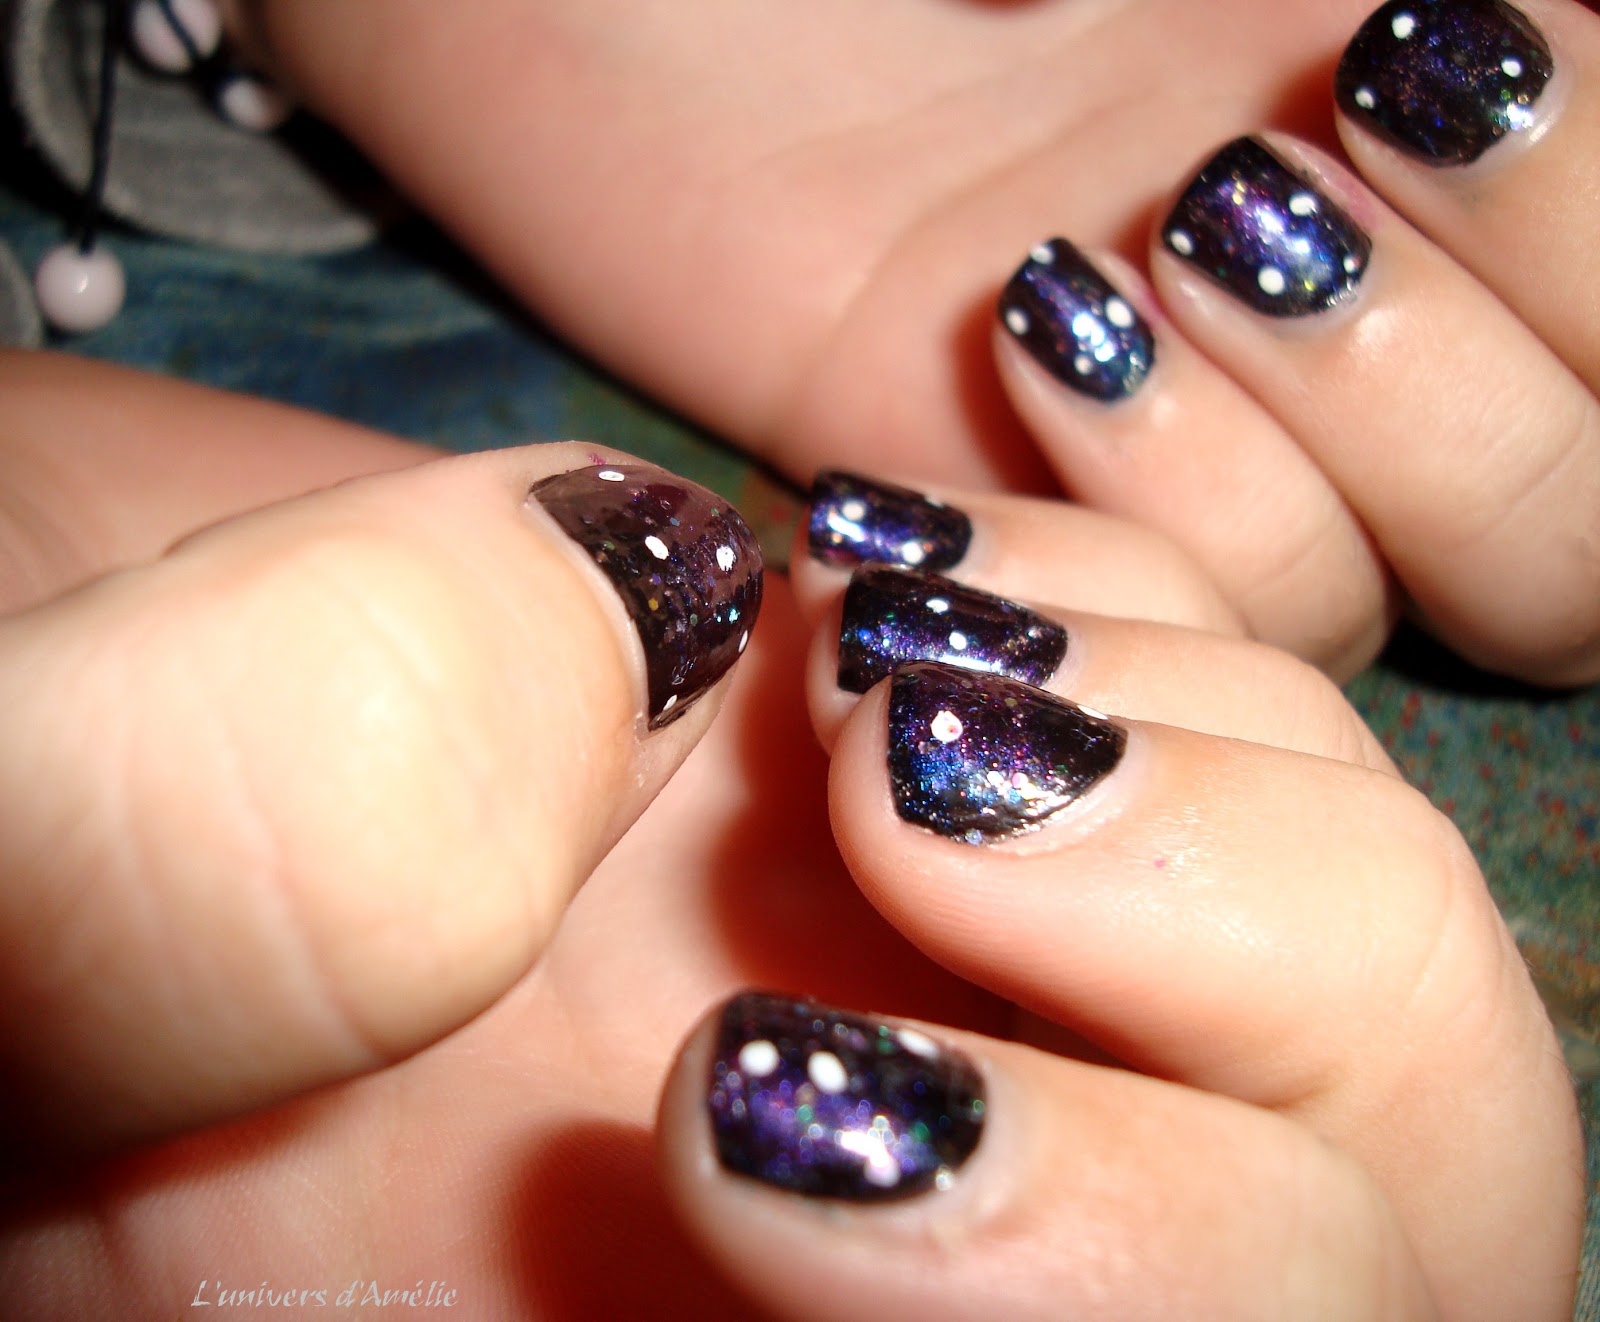 1. Galaxy Nail Art Tutorial: Step by Step Guide - wide 4